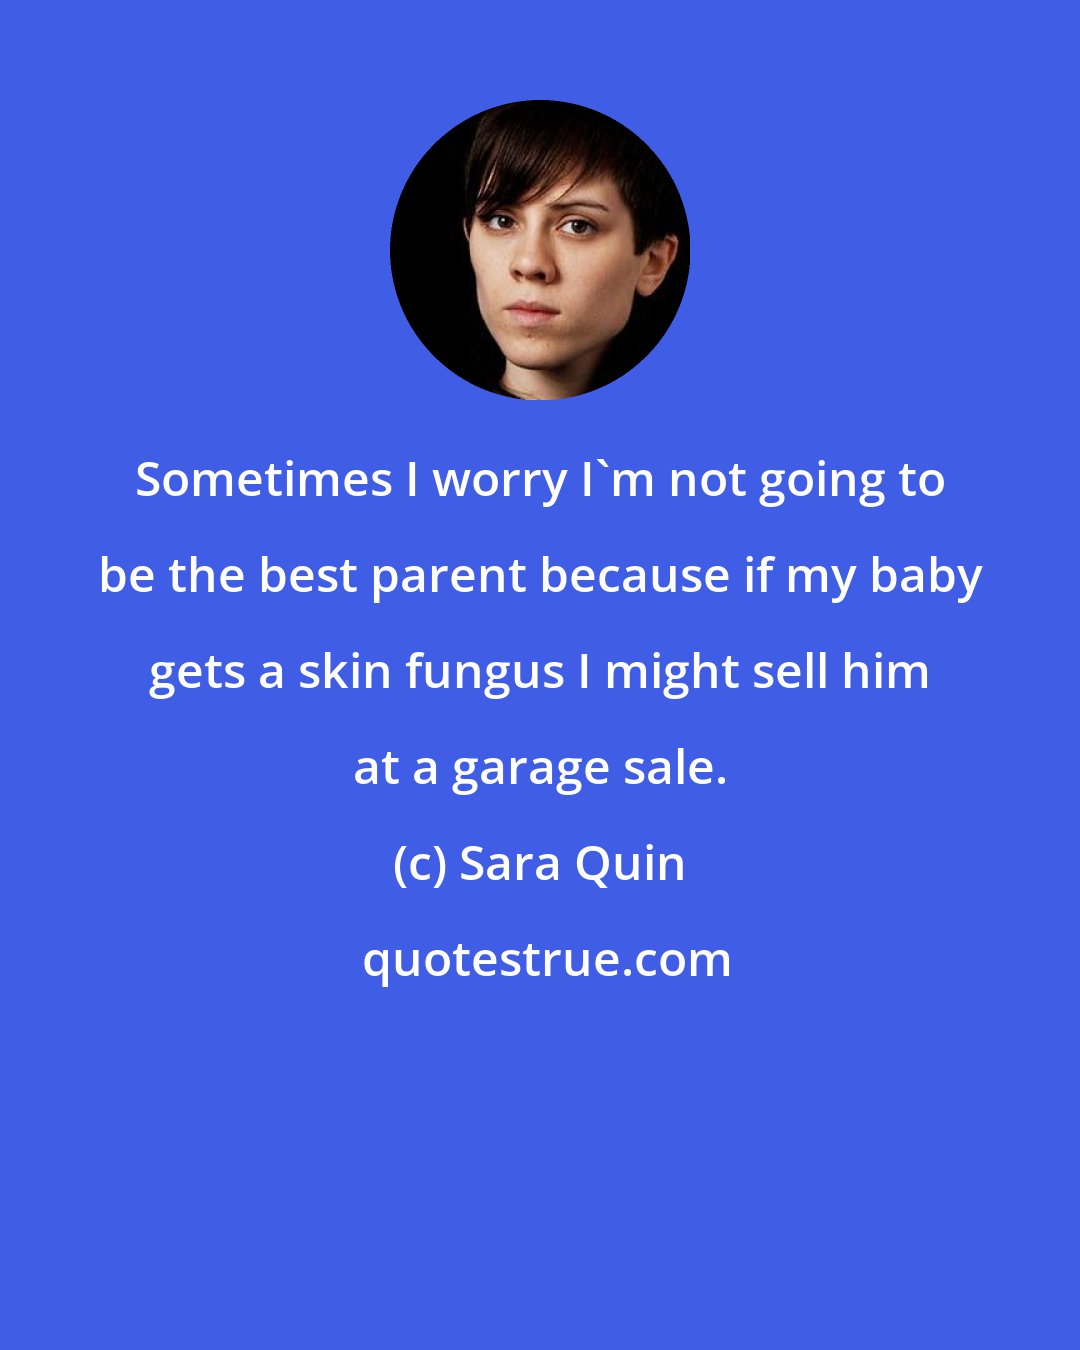 Sara Quin: Sometimes I worry I'm not going to be the best parent because if my baby gets a skin fungus I might sell him at a garage sale.